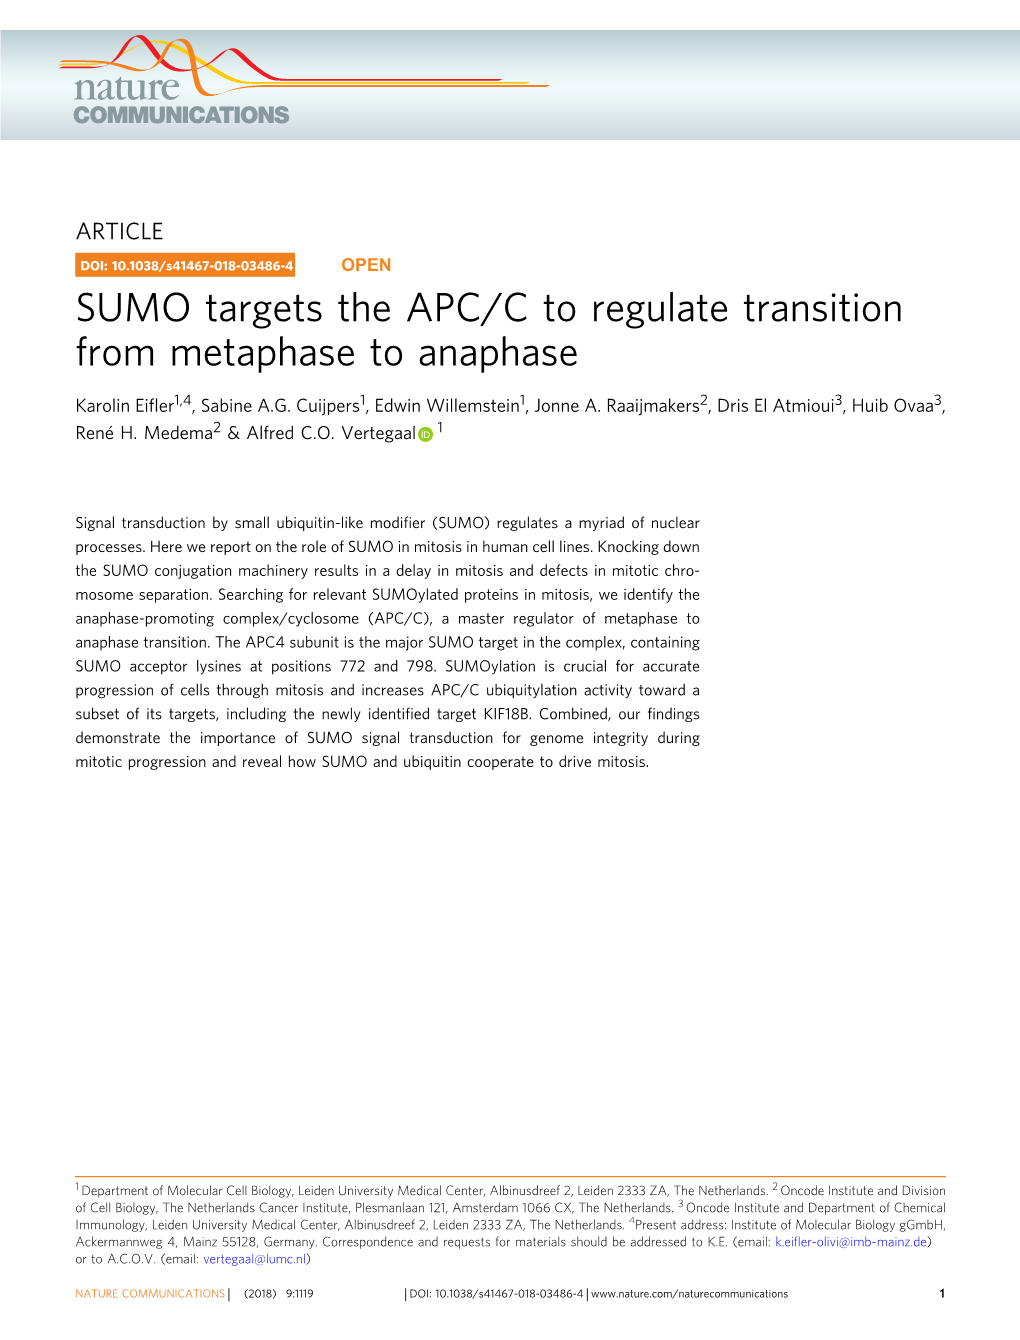 SUMO Targets the APC/C to Regulate Transition from Metaphase to Anaphase